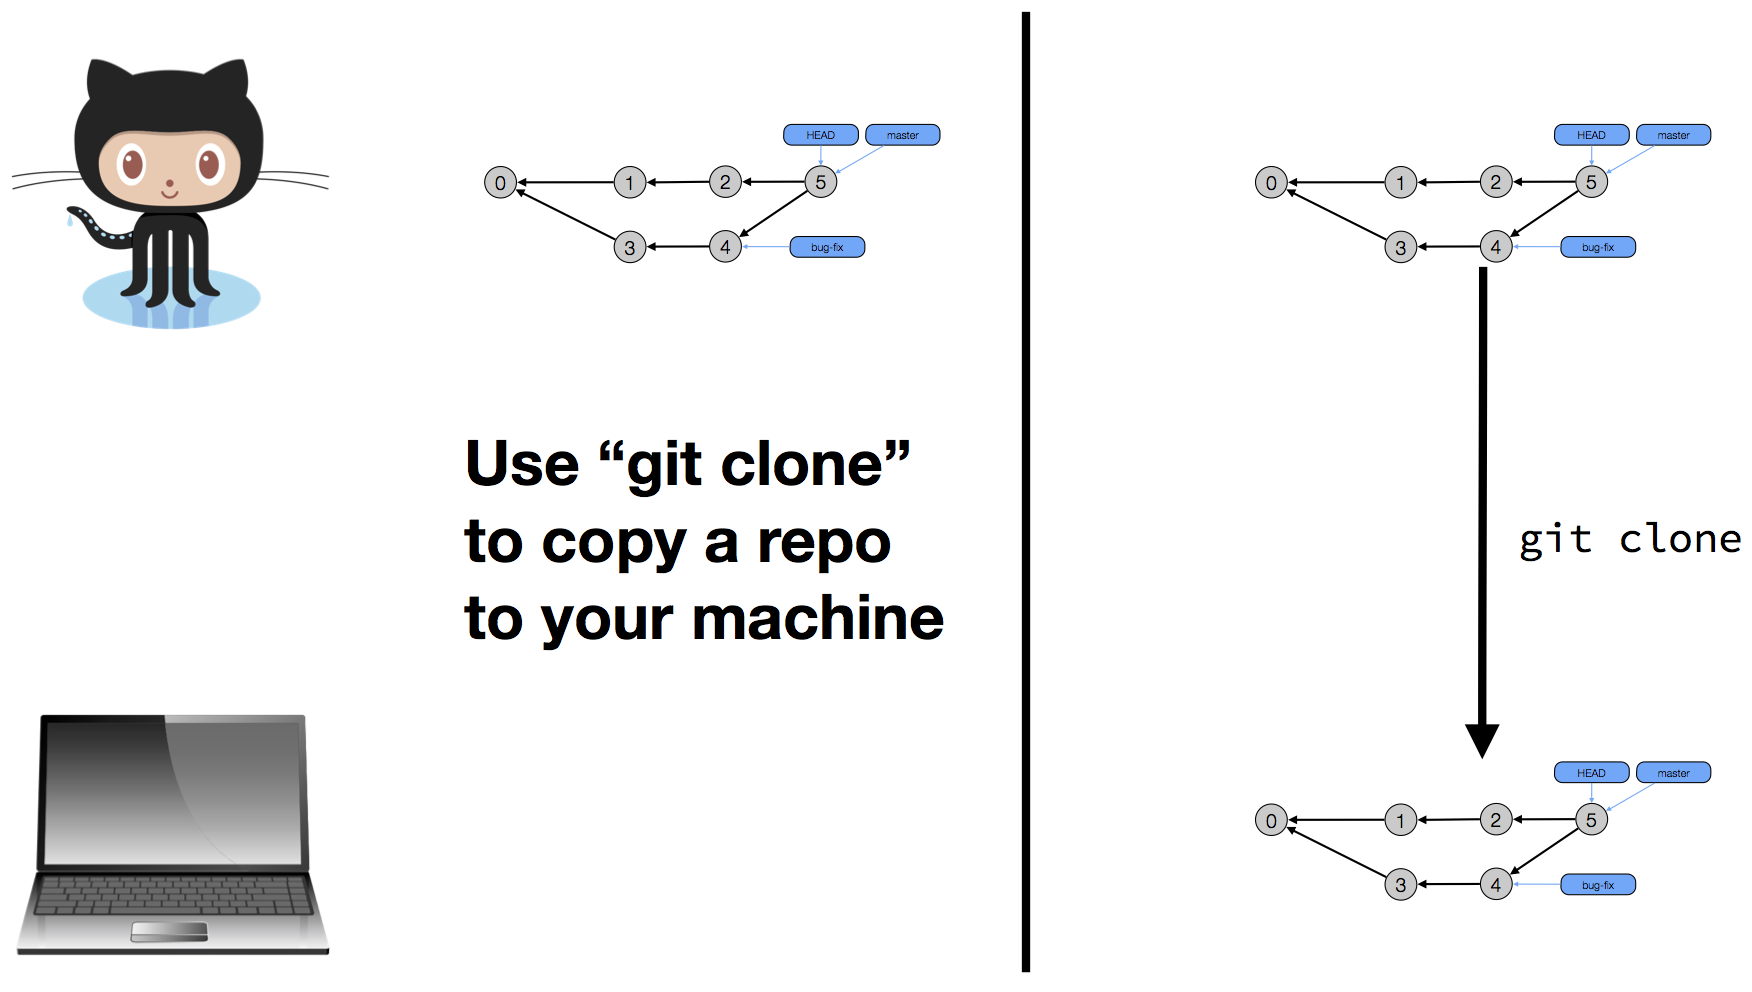 git clone into current directory